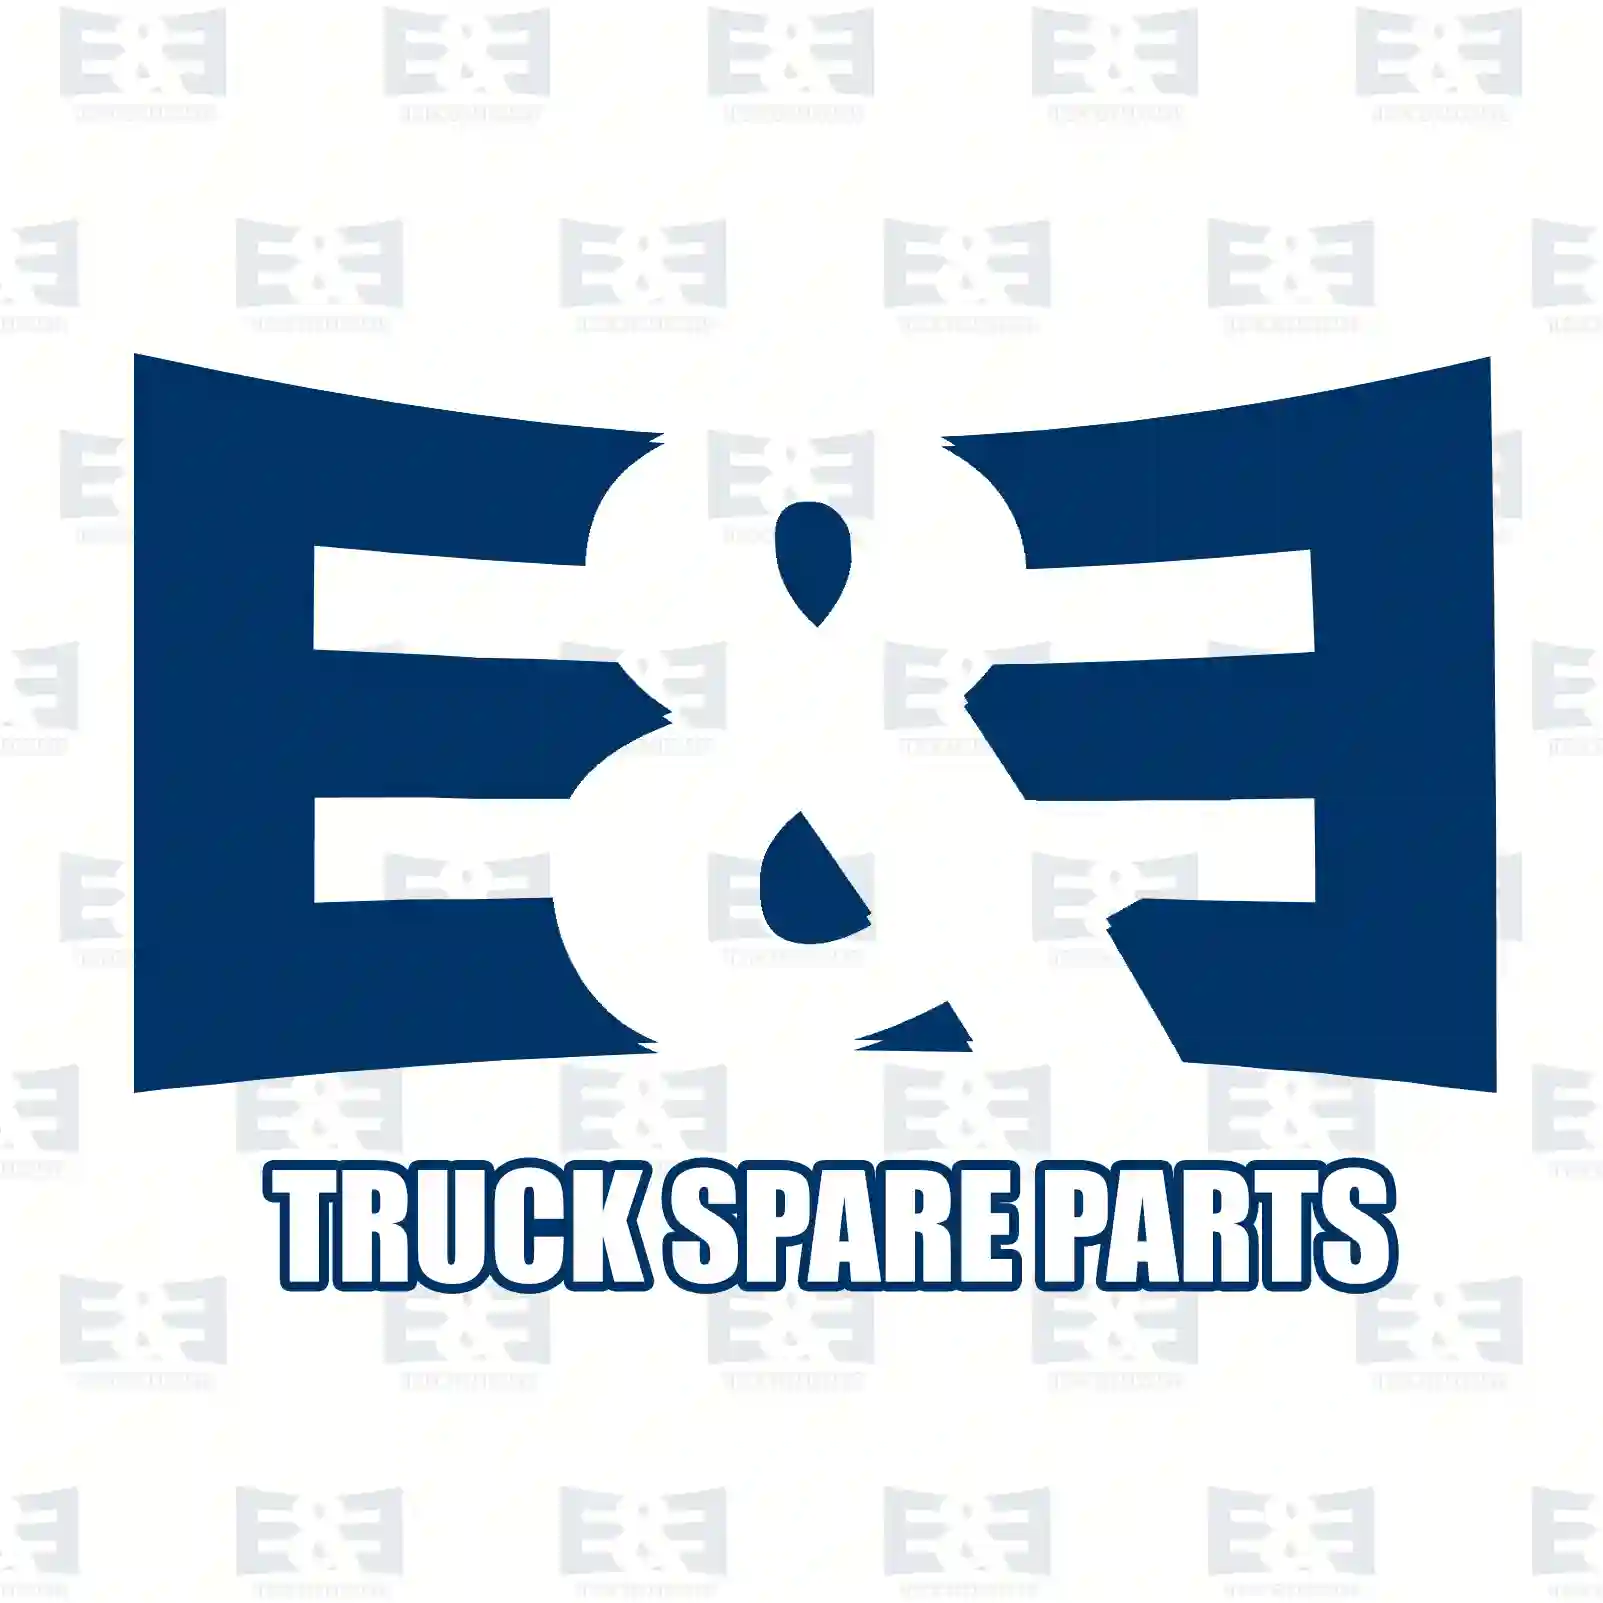  Radiator, without air conditioning || E&E Truck Spare Parts | Truck Spare Parts, Auotomotive Spare Parts